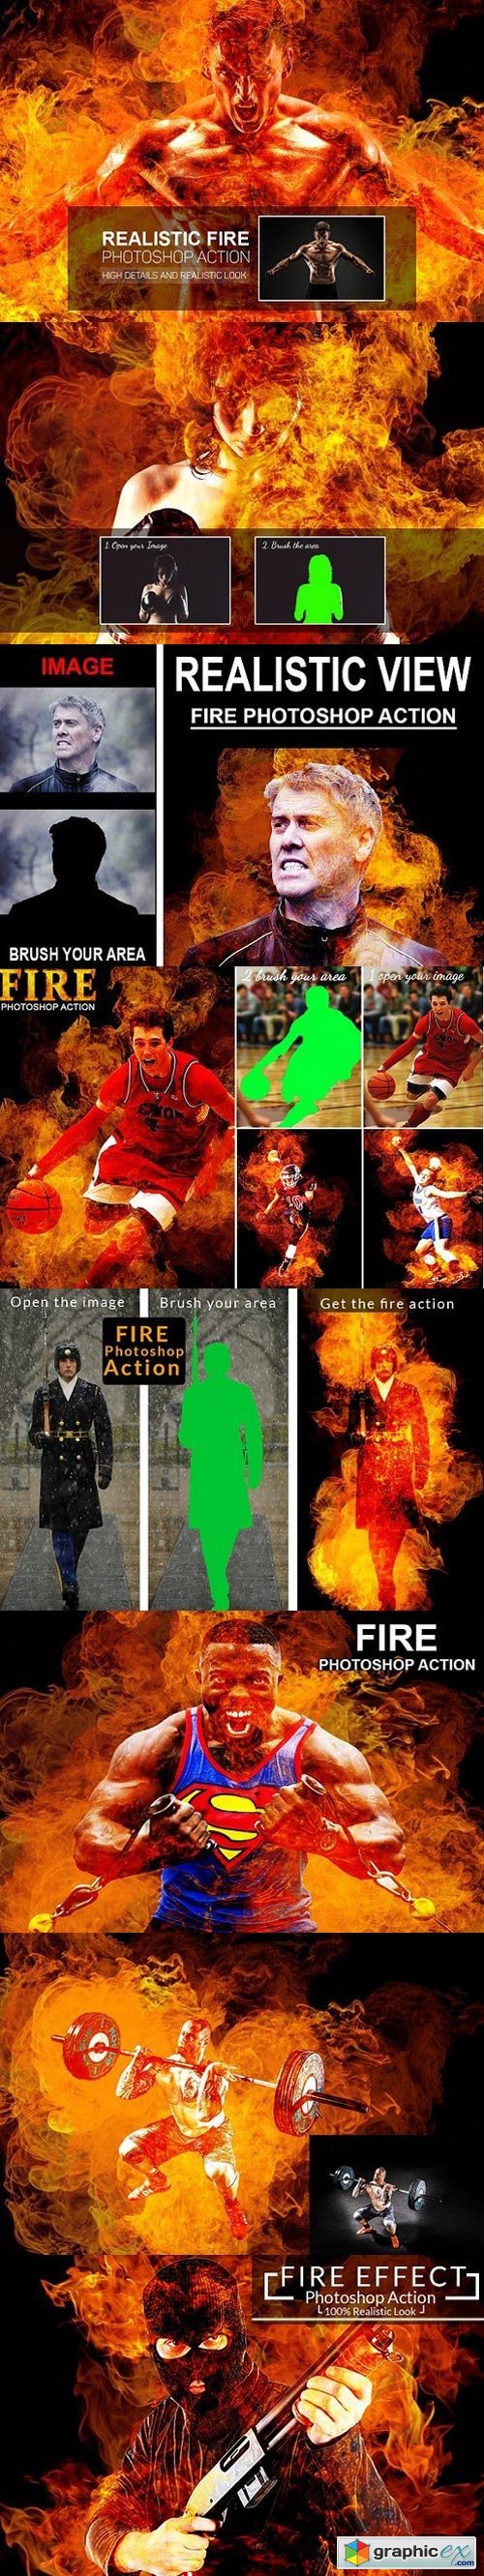 Realistic Fire Photoshop Action